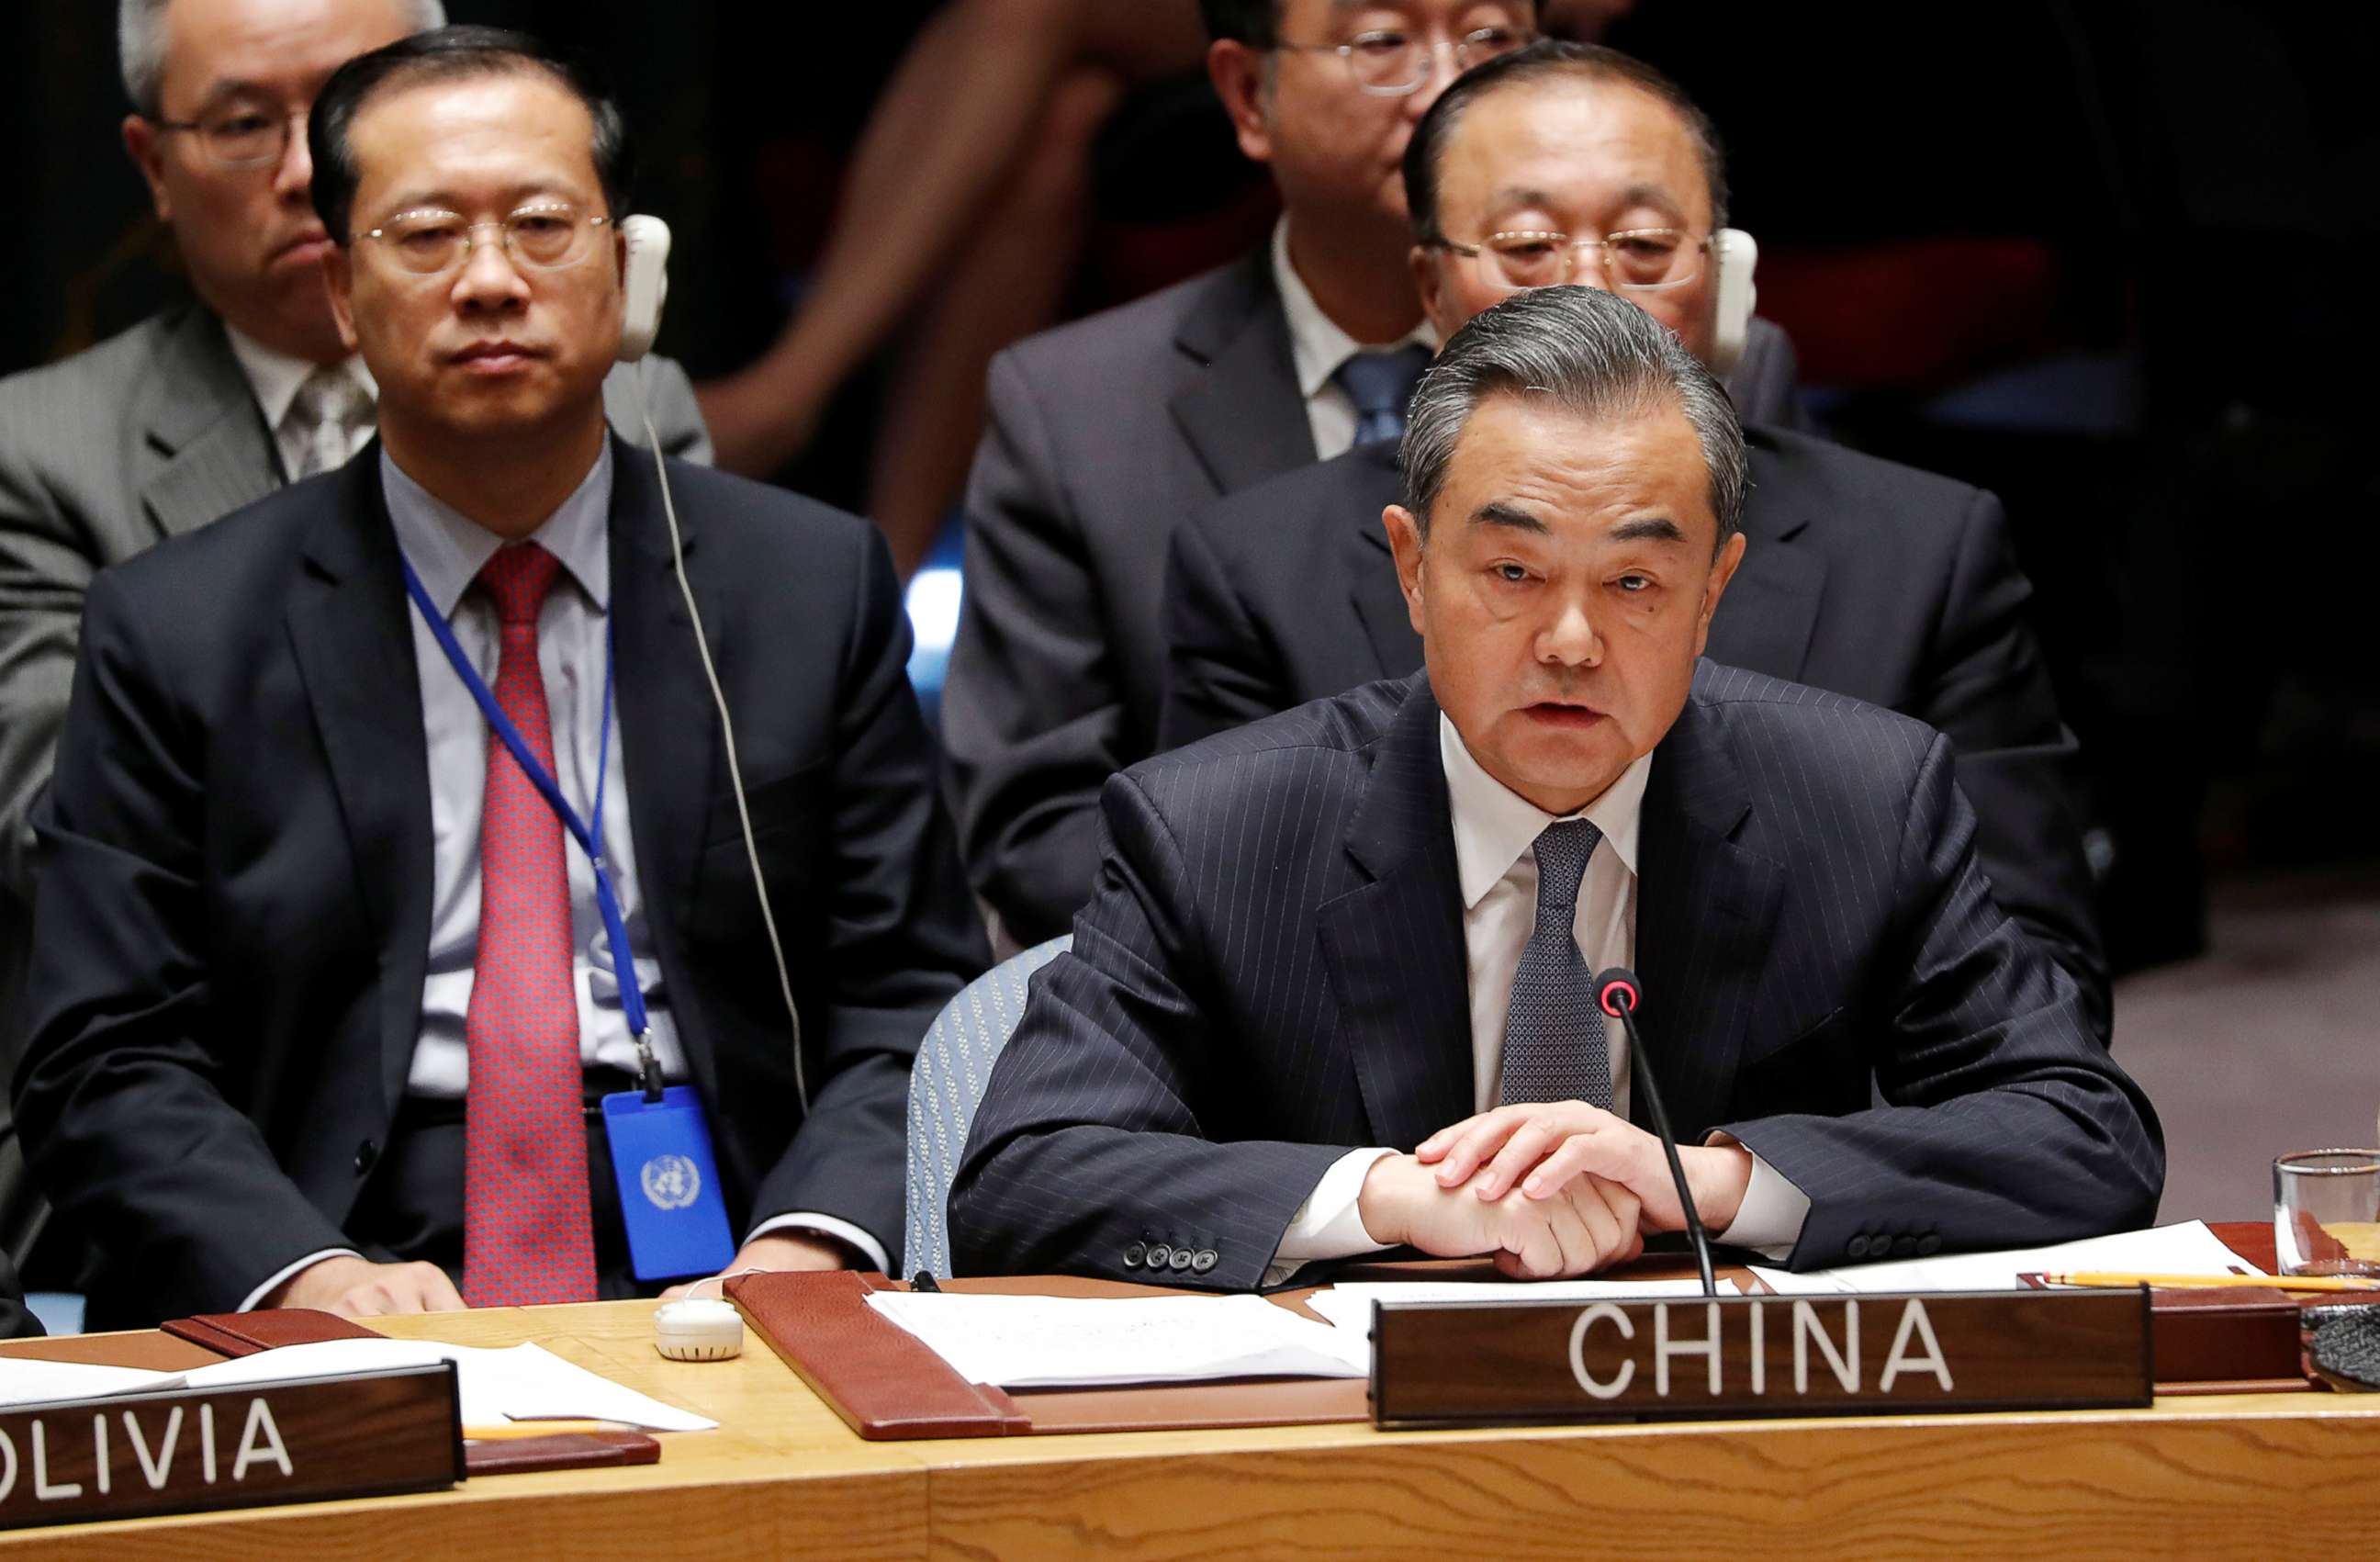 PHOTO: China's Foreign Minister Wang Yi addresses a U.N. Security Council meeting at the 73rd session of the United Nations General Assembly at U.N. headquarters in N.Y., Sept. 26, 2018.